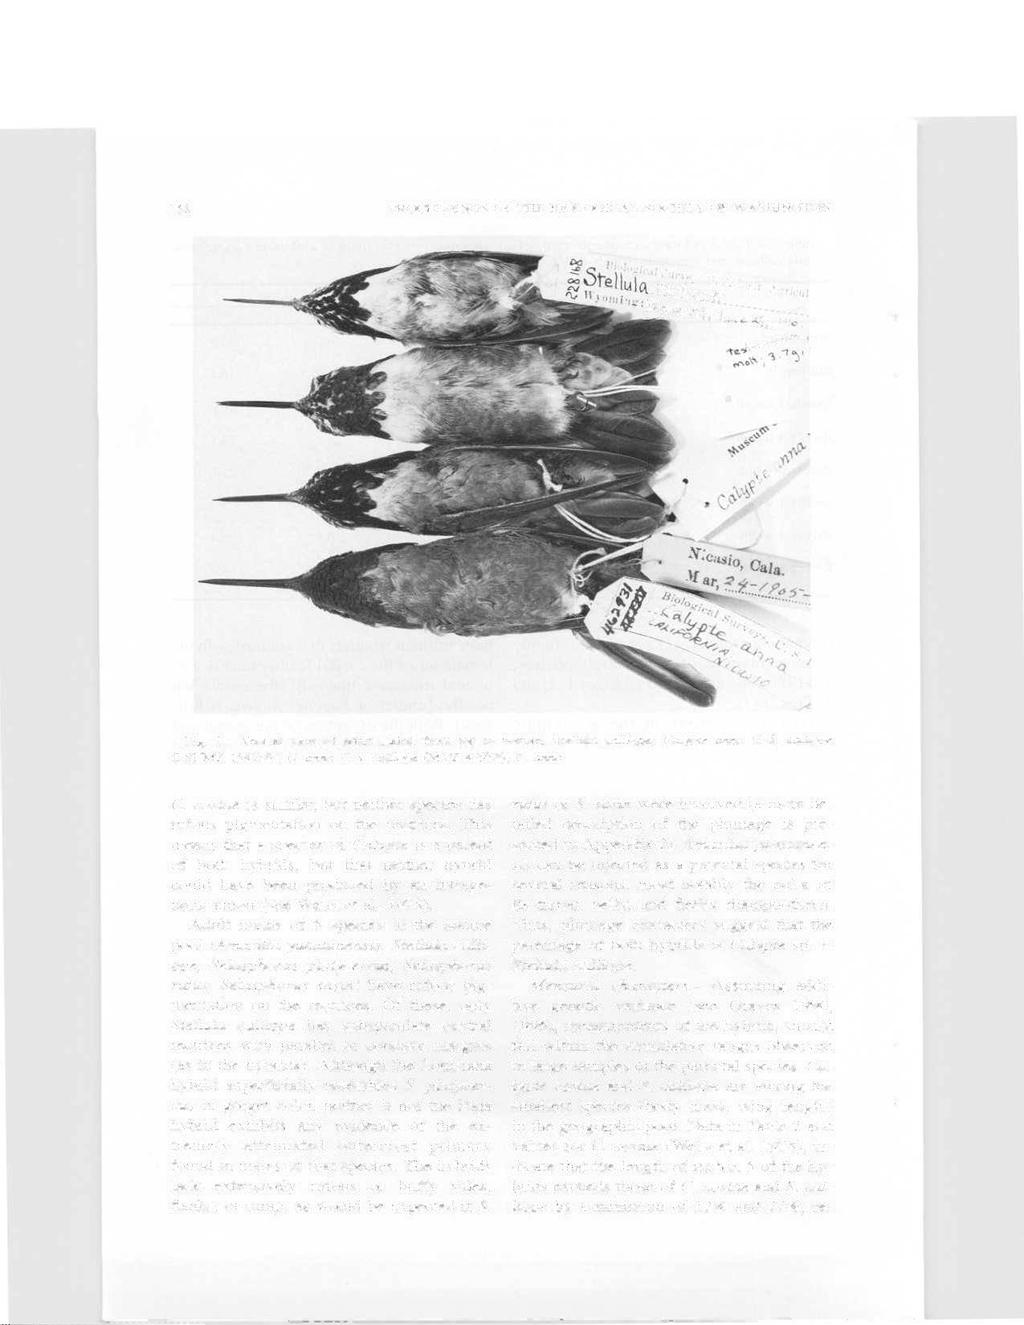 7SS PROCEEDINGS OF THE BIOLOGICAL SOCIETY OF WASHINGTON CaJli' opfi % 'It T Fig. 1. Ventral view of adult males, from top to bottom: Stellula calliope: Calypte anna x 5. calliope (LSUMZ 154189): C.